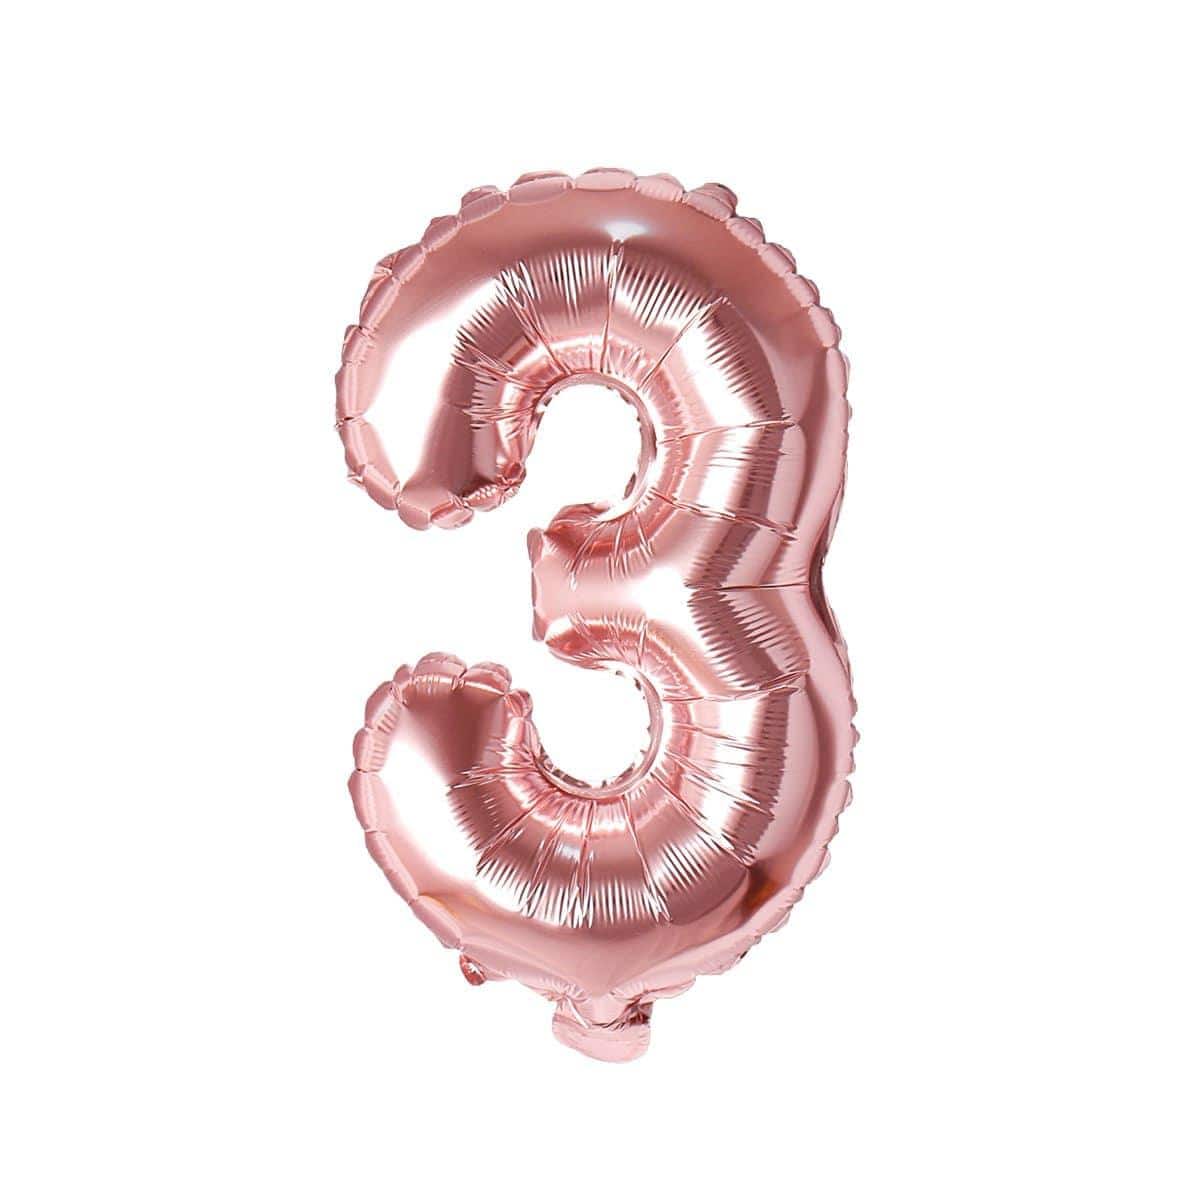 Buy Balloons Rose Gold Number 3 Foil Balloon, 16 Inches sold at Party Expert